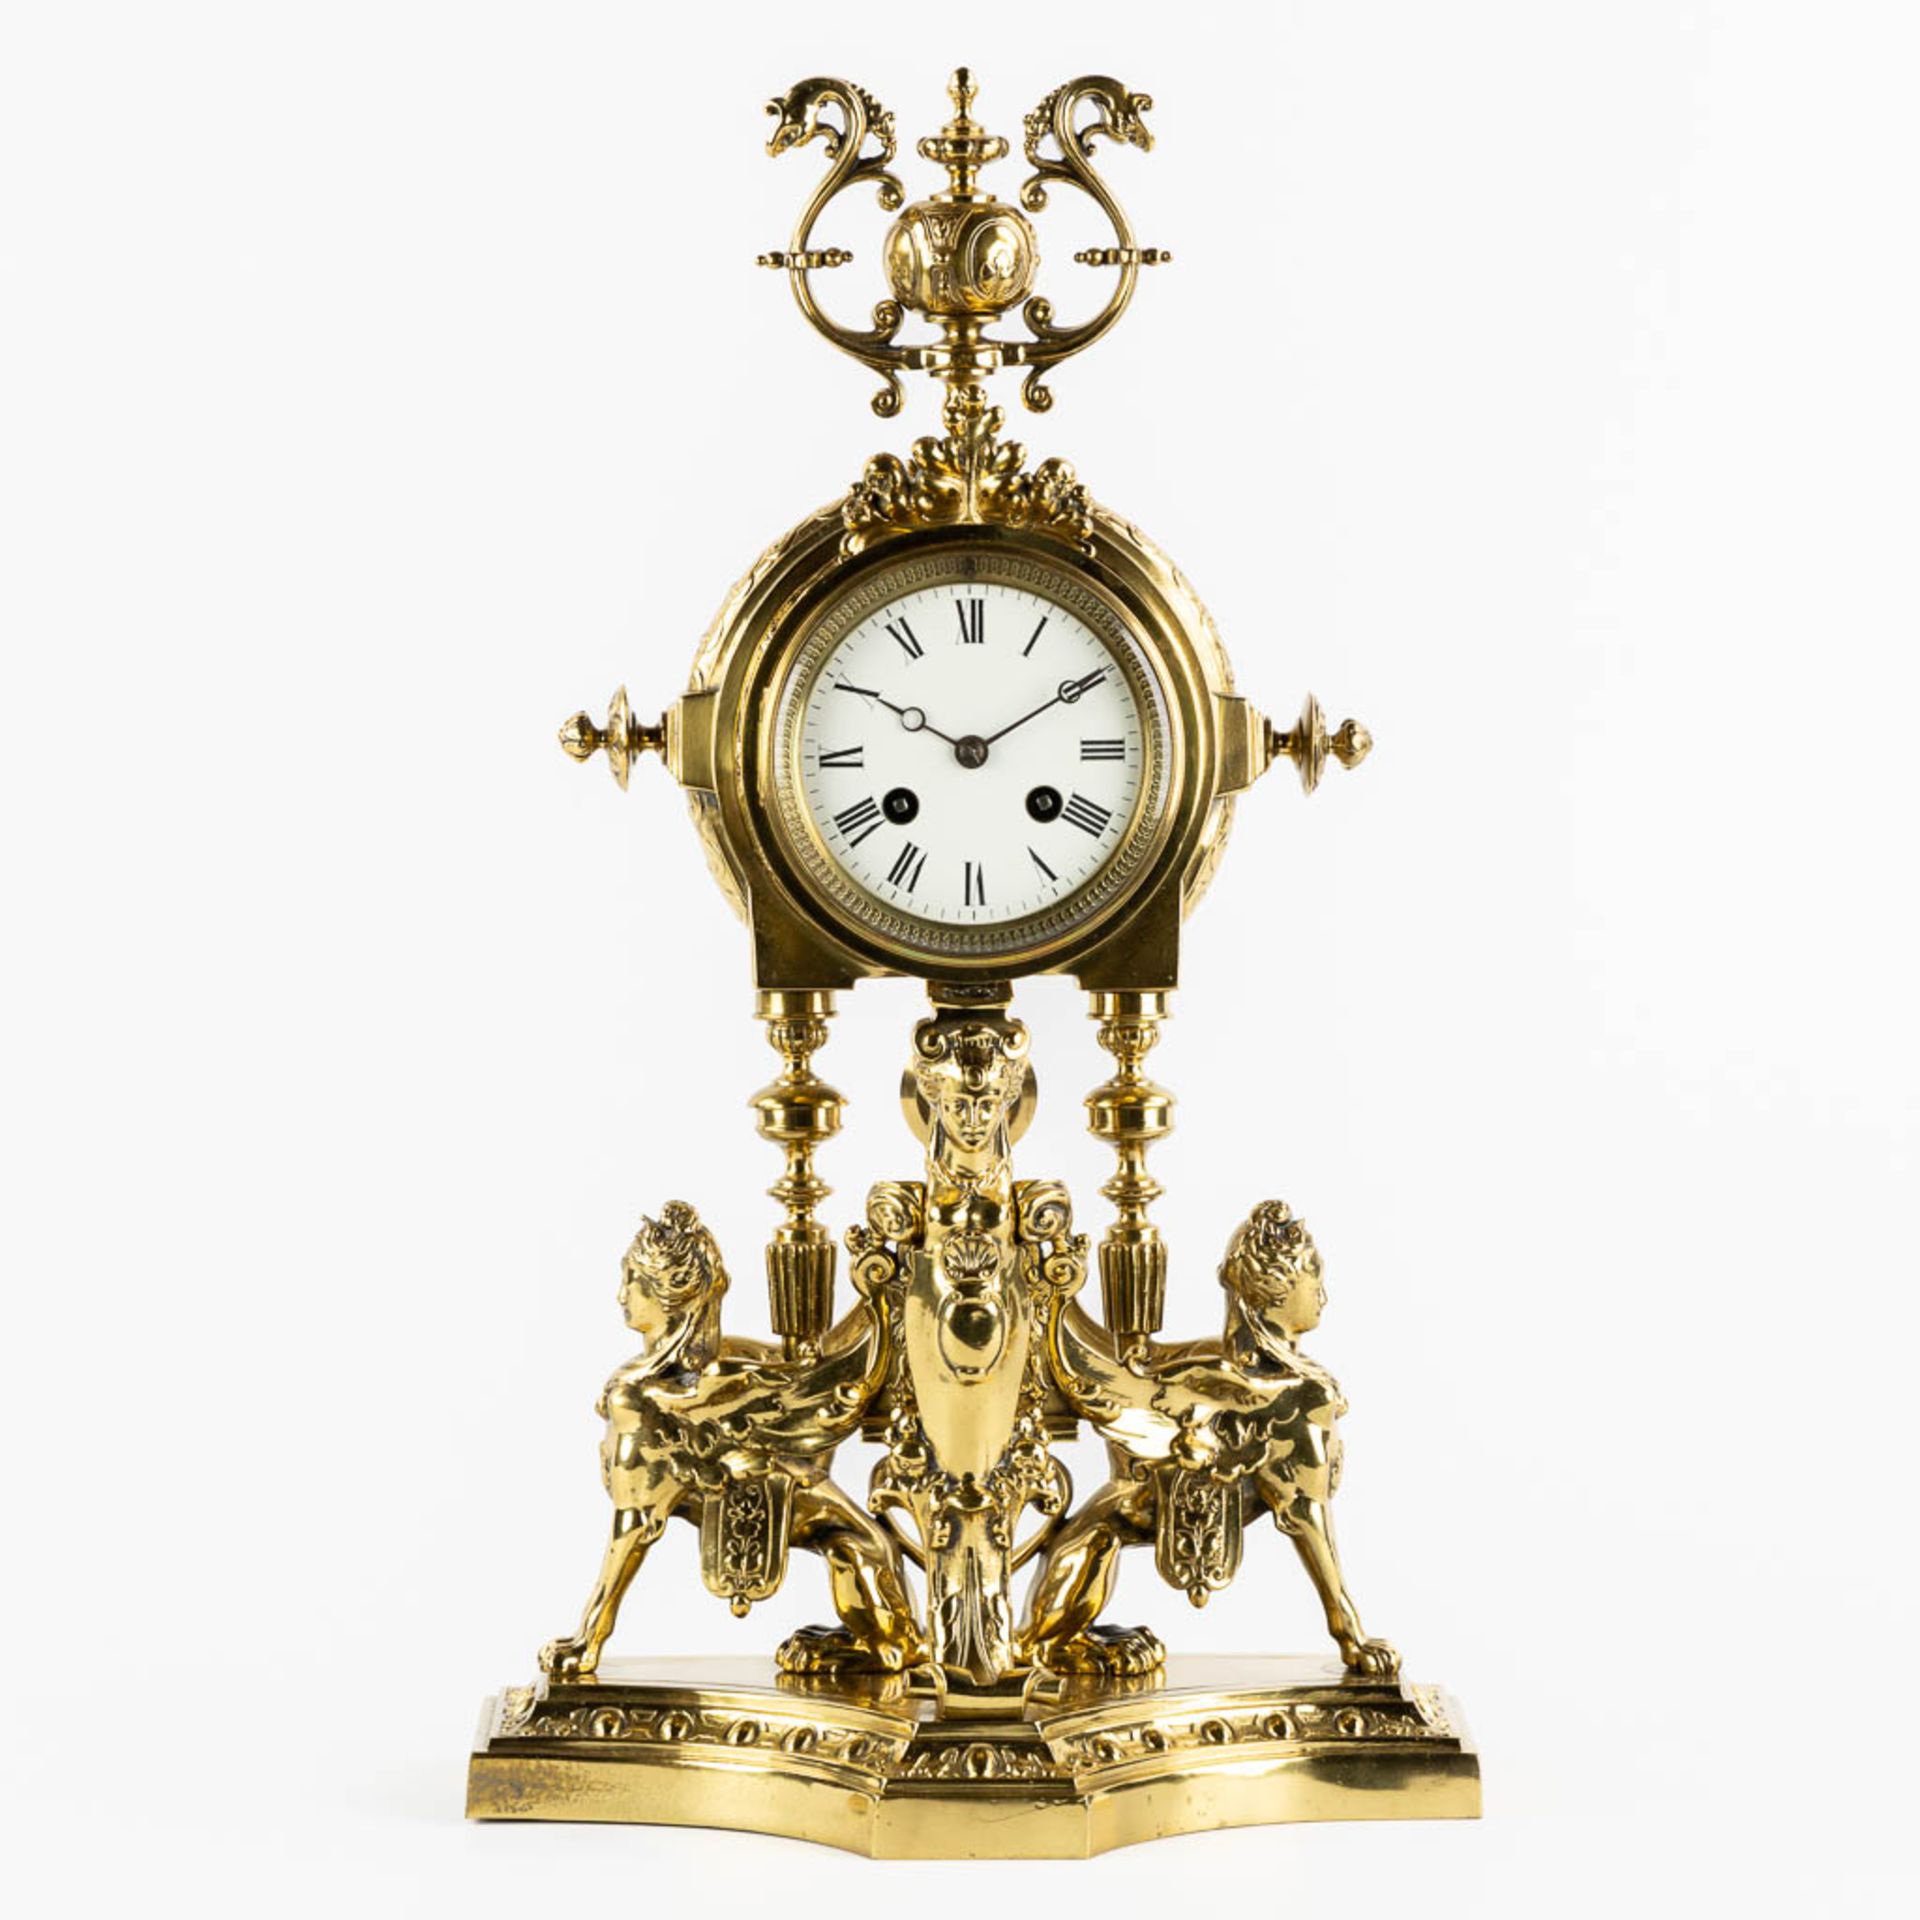 A mantle clock, polished bronze, decorated with Mythological Figures. Circa 1880. (L:15 x W:26 x H:4